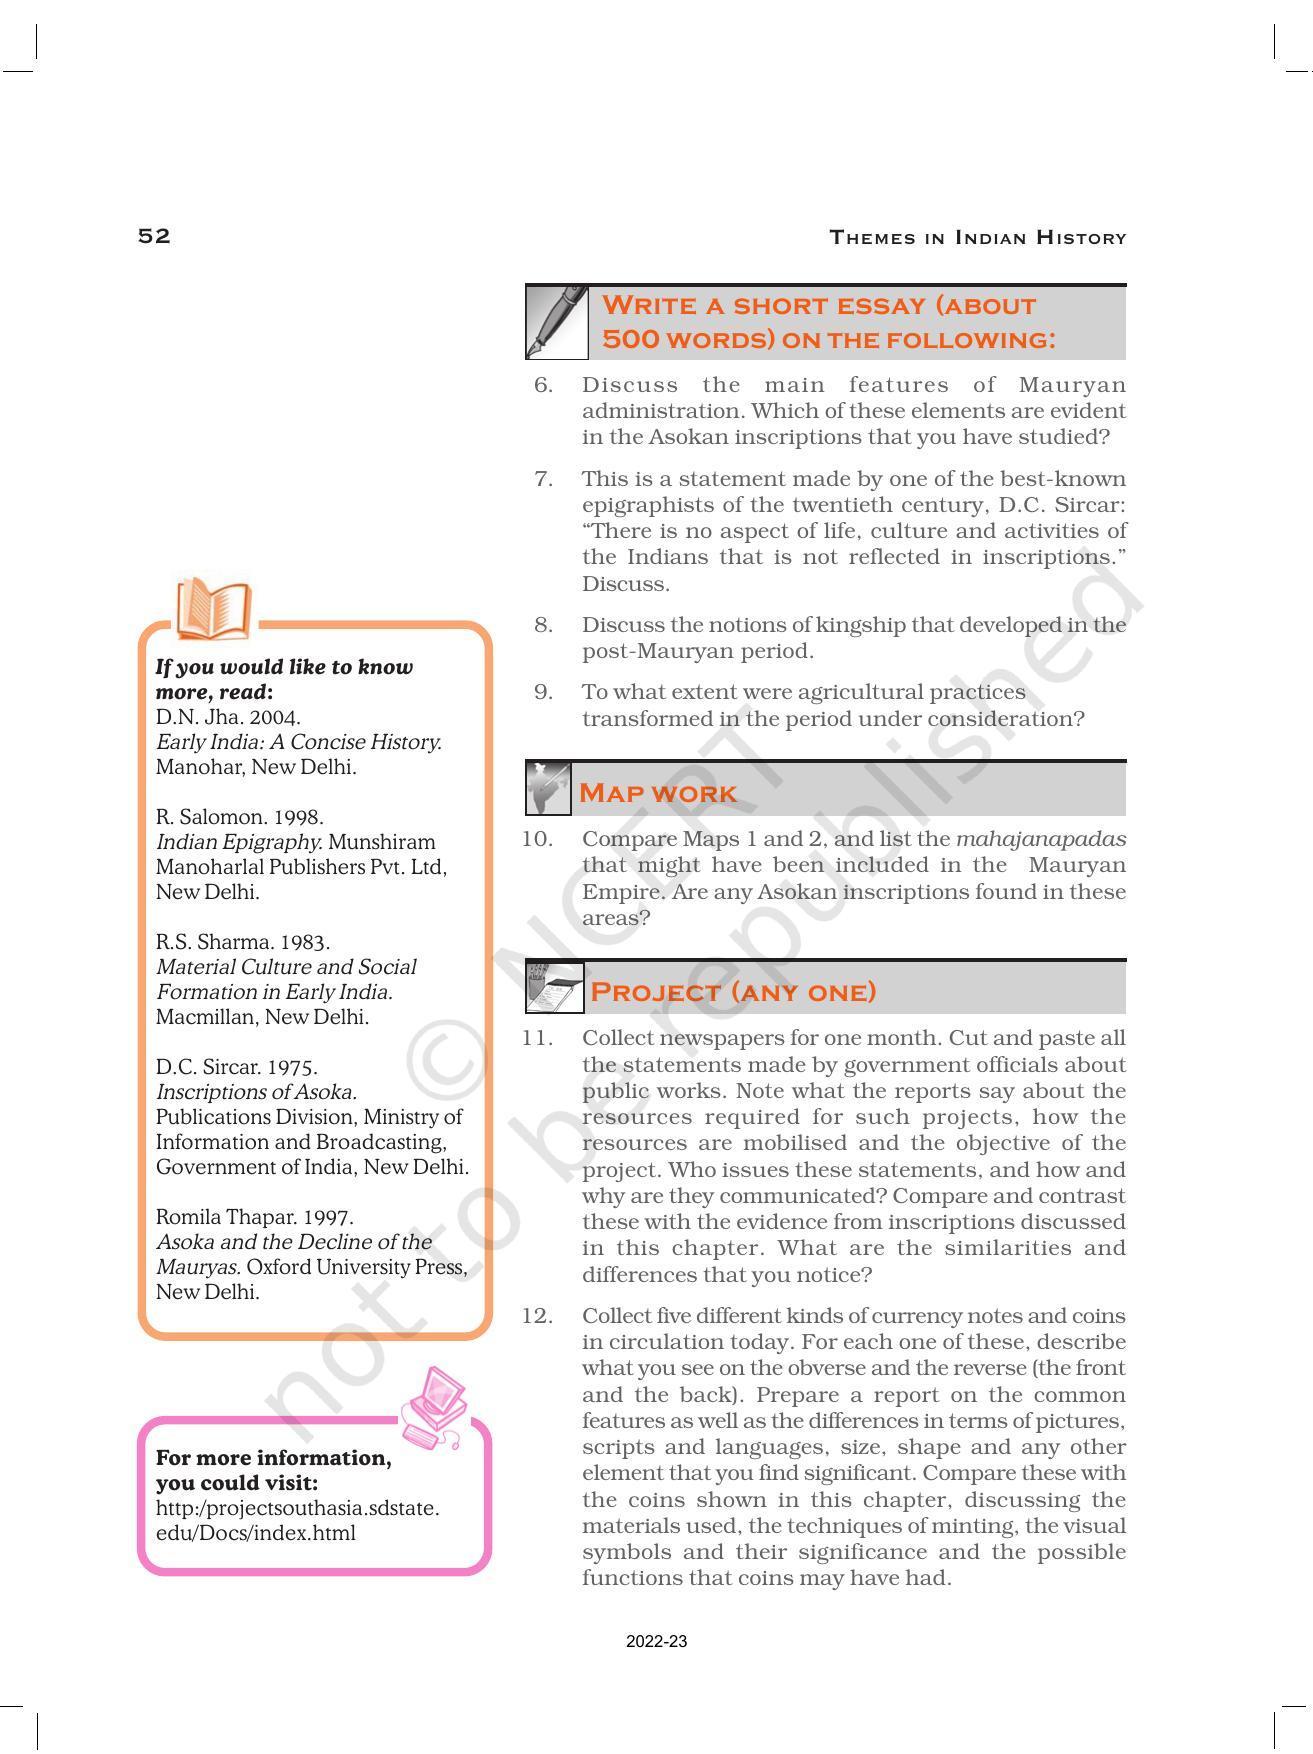 NCERT Book for Class 12 History (Part-1) Chapter 2 Kings, Farmers, and Towns - Page 25